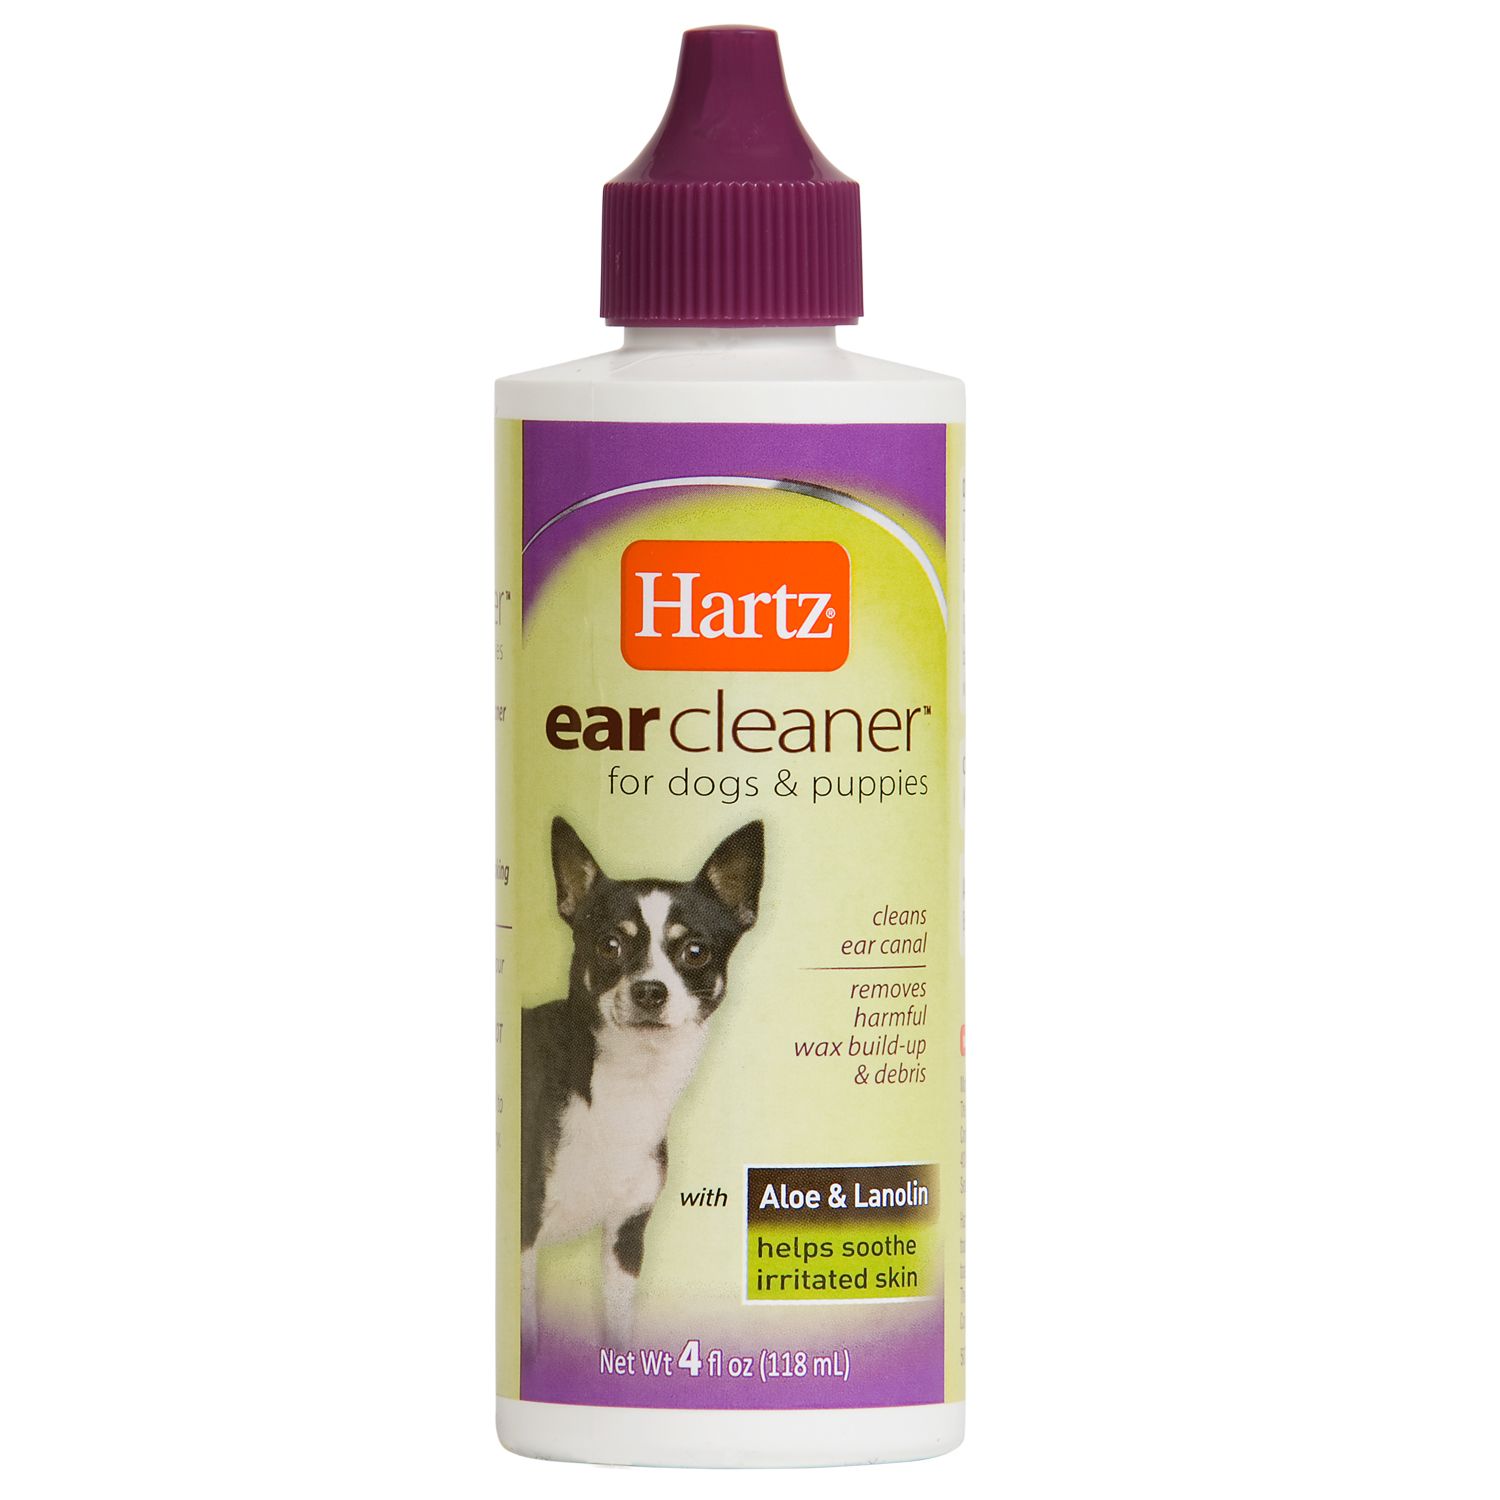 Hartz Ear Cleaner for Dogs & Puppies, 4 oz